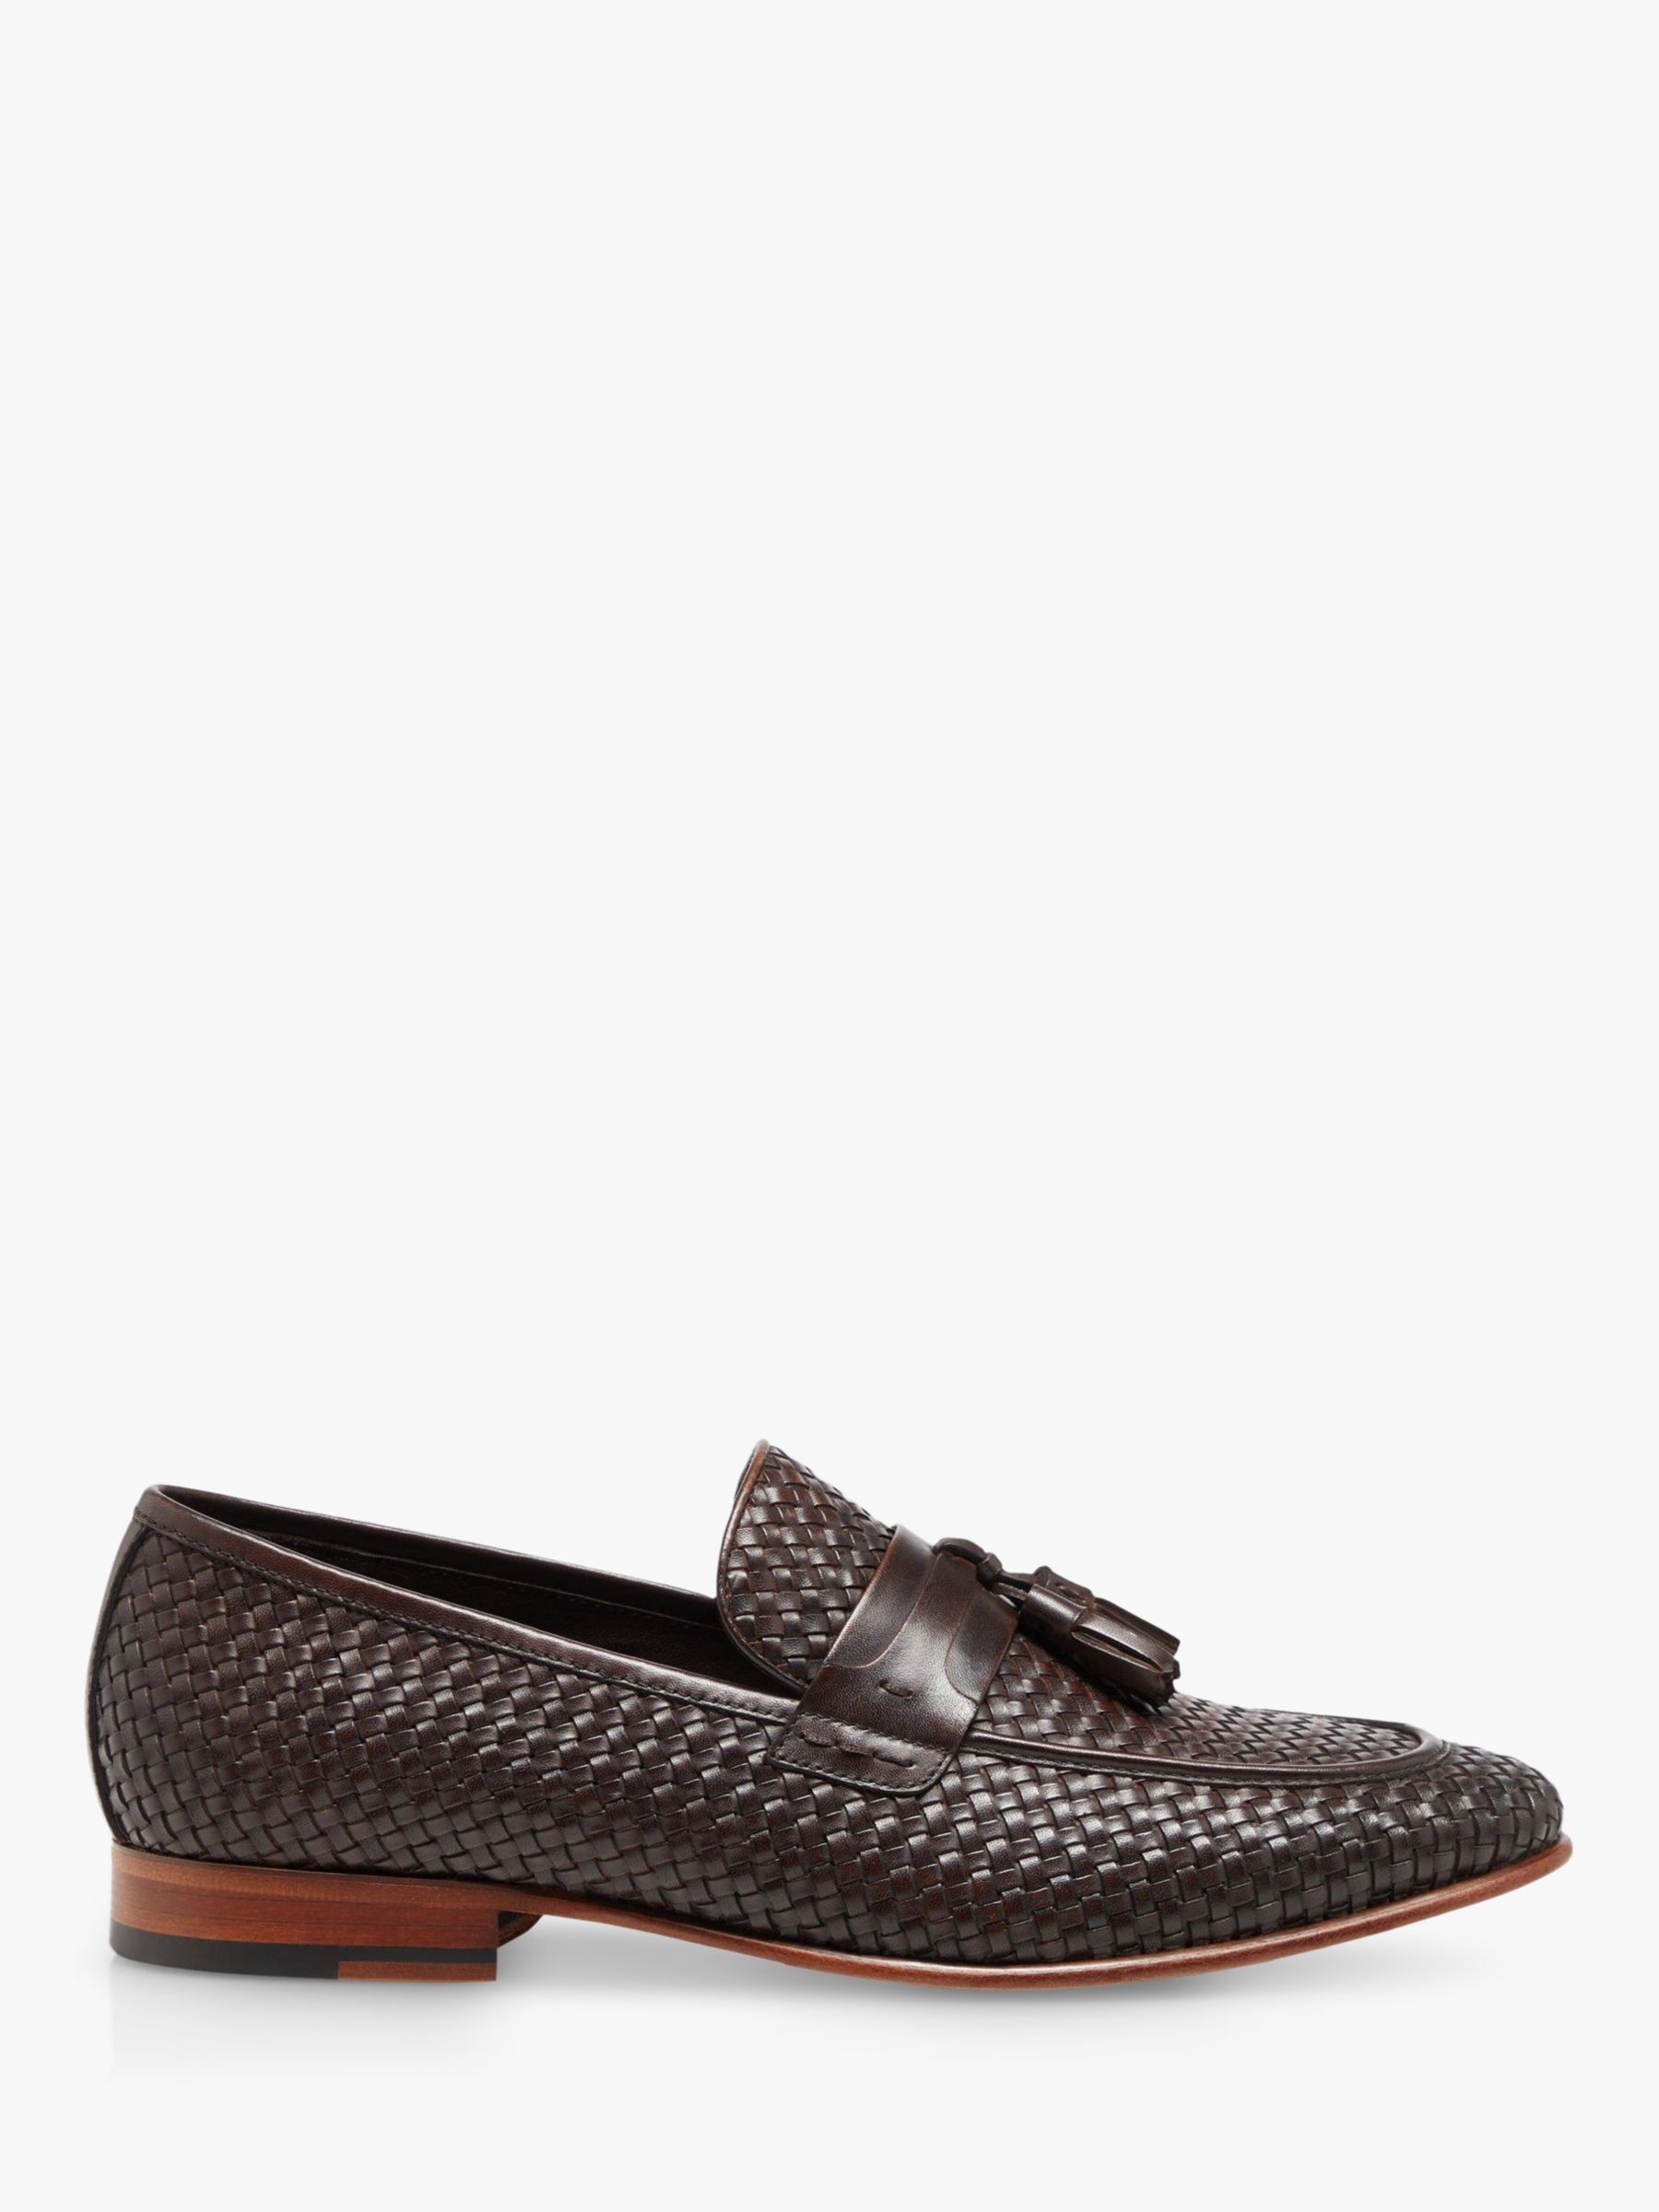 Dune Stanleys Leather Woven Loafers, Brown